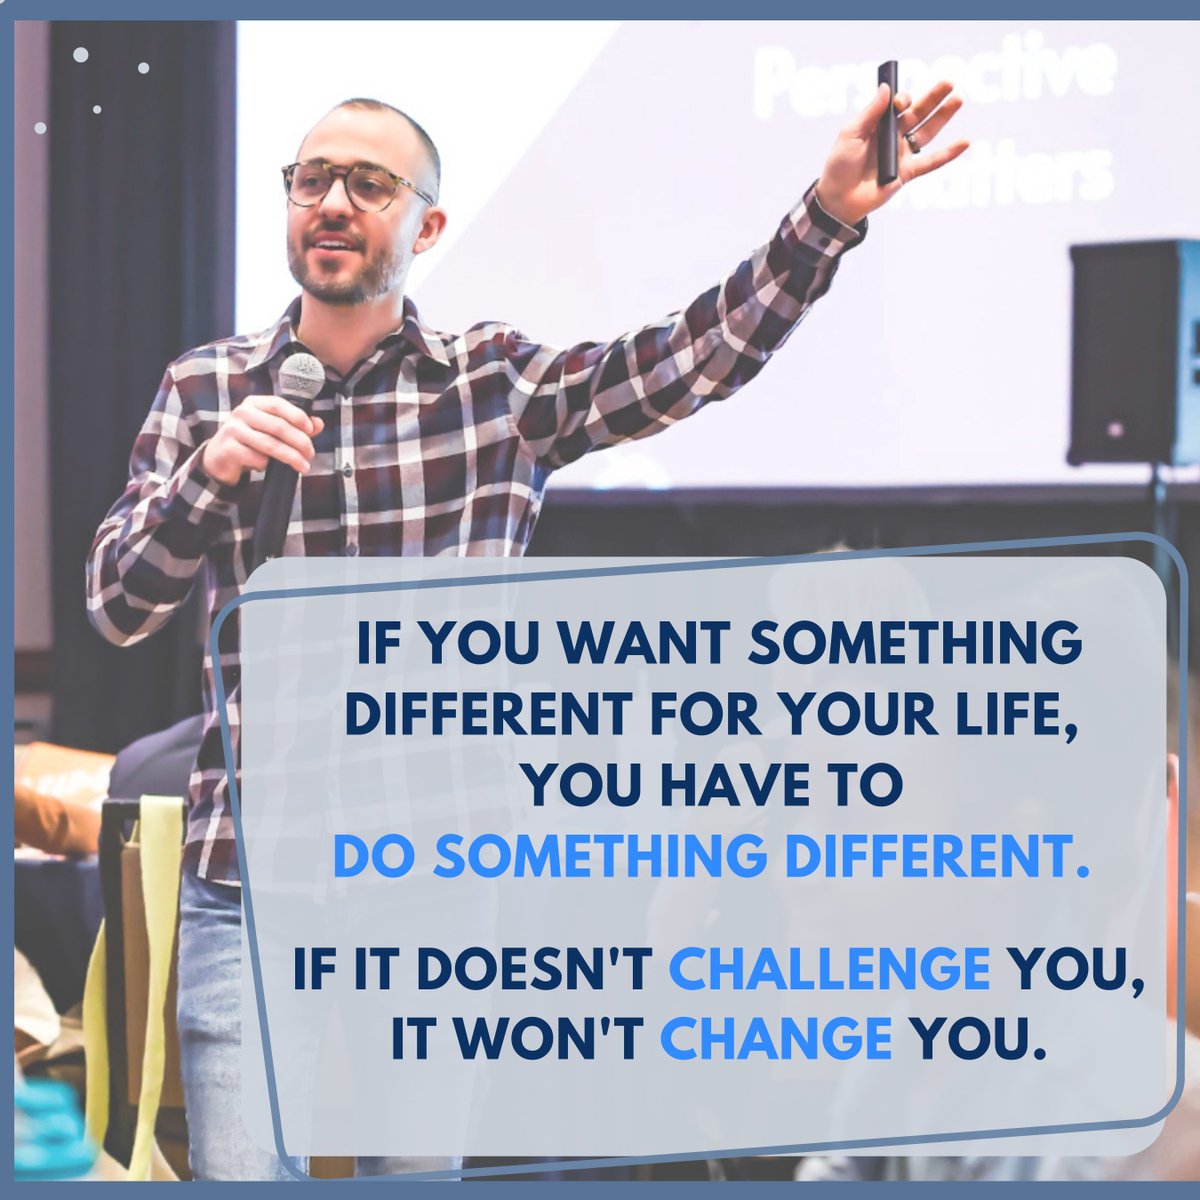 Take a look at your current season - where are you being challenged?  Here is your opportunity for personal growth.  It all starts with the right perspective.

Turn your challenges into change. 

#buildingauthenticity
#growthisachoice
#personaldevelopment